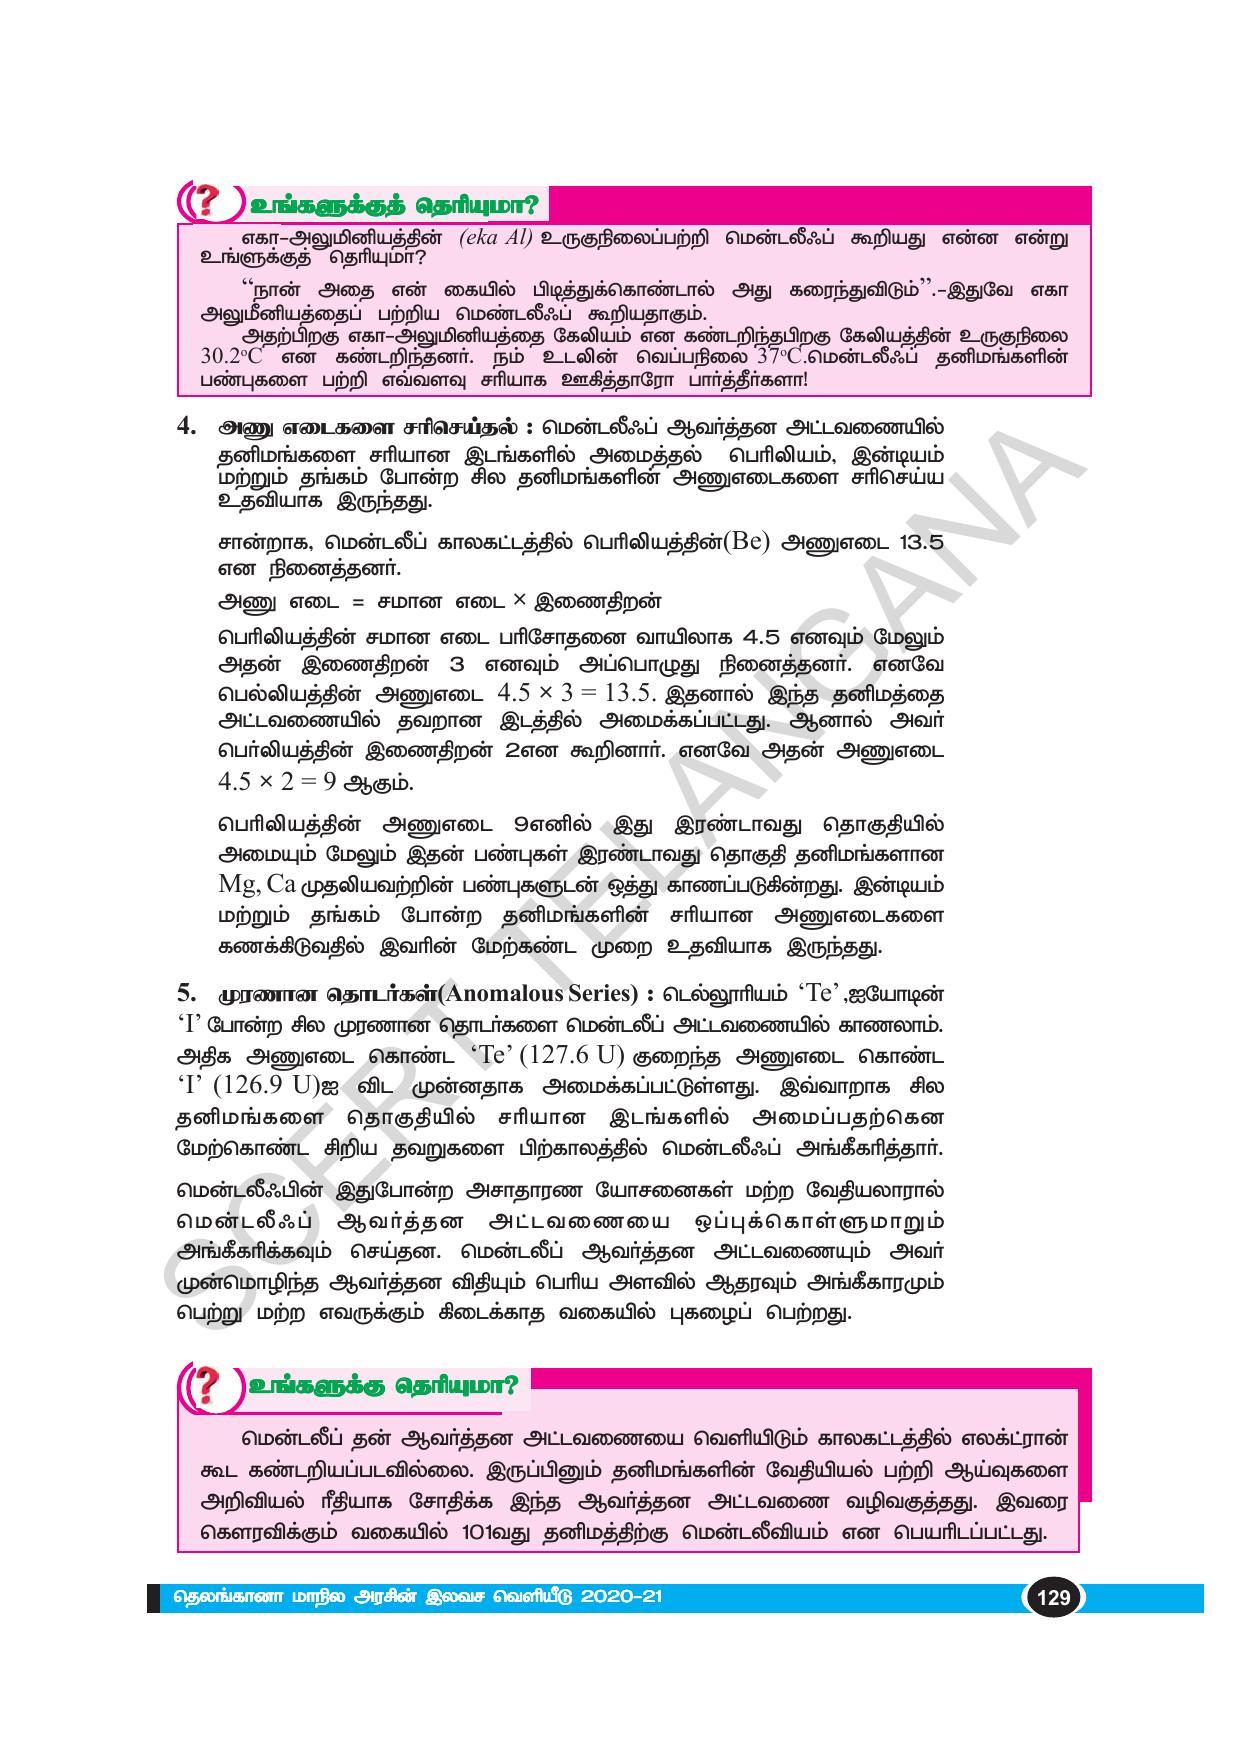 TS SCERT Class 10 Physical Science(Tamil Medium) Text Book - Page 141